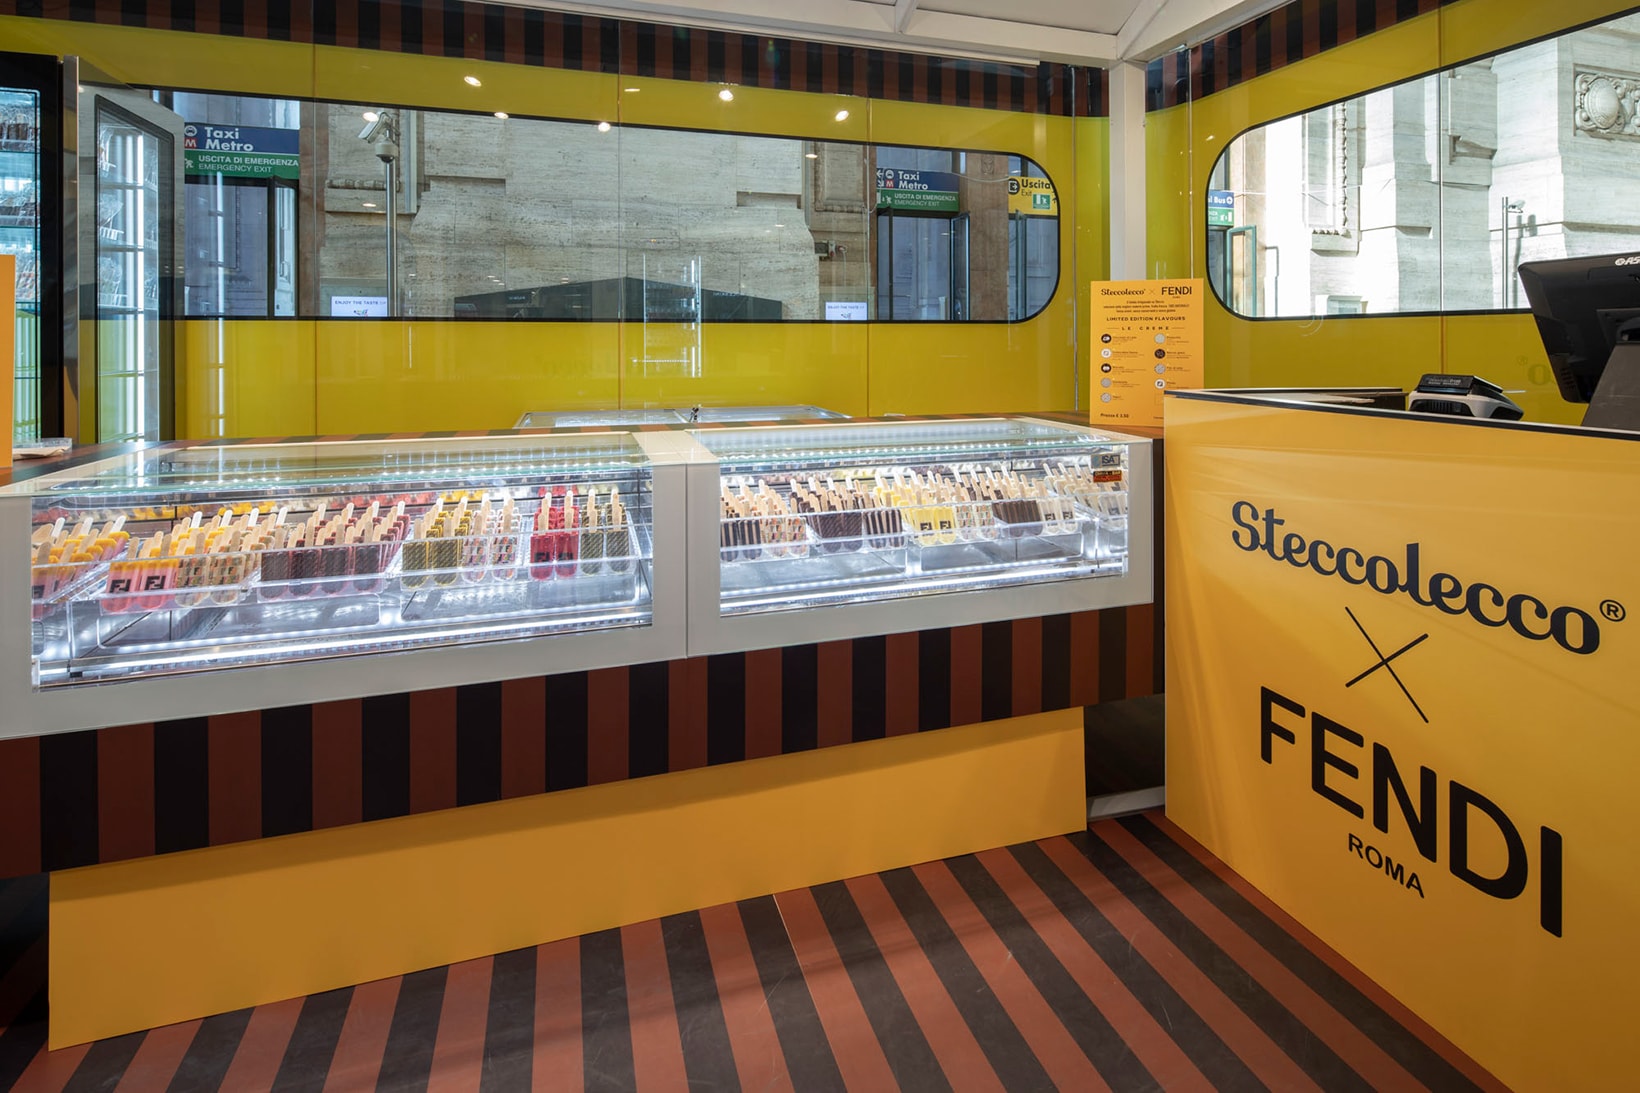 fendi steccolecco collaboration ice cream pop up milan central station dessert food sweets